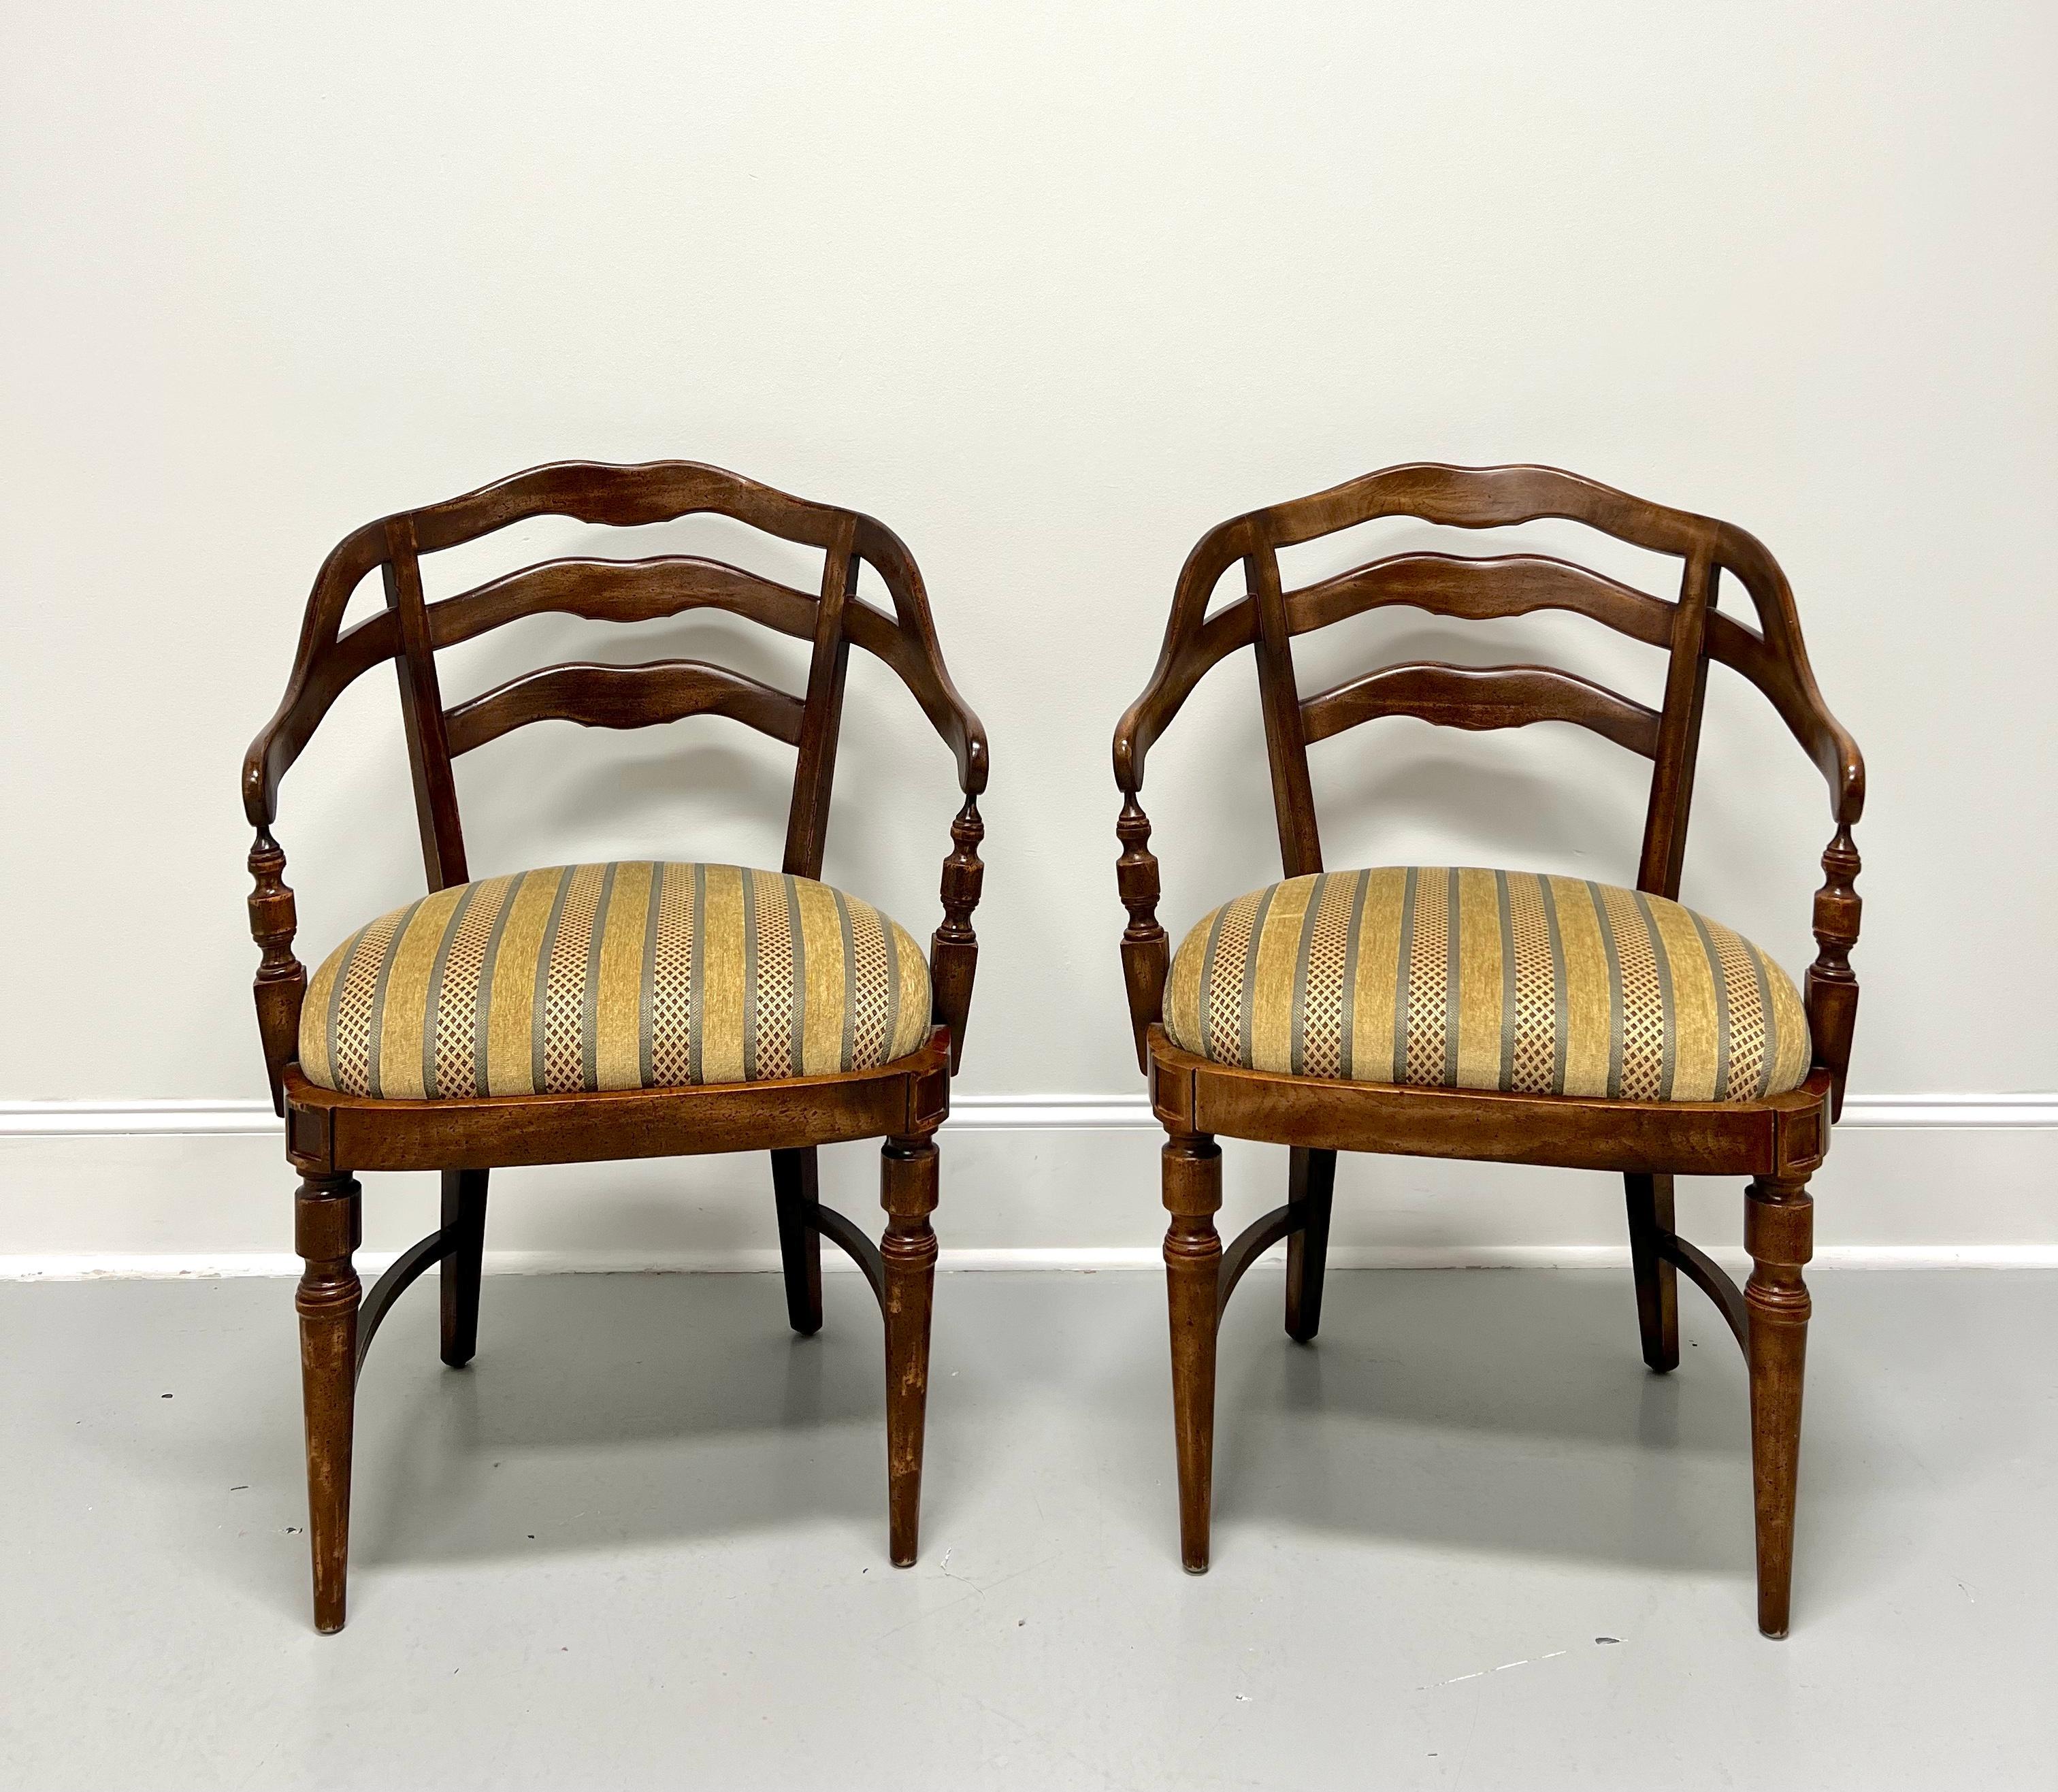 French Provincial Mid 20th Century Maple French Country Barrel Chairs - Pair For Sale